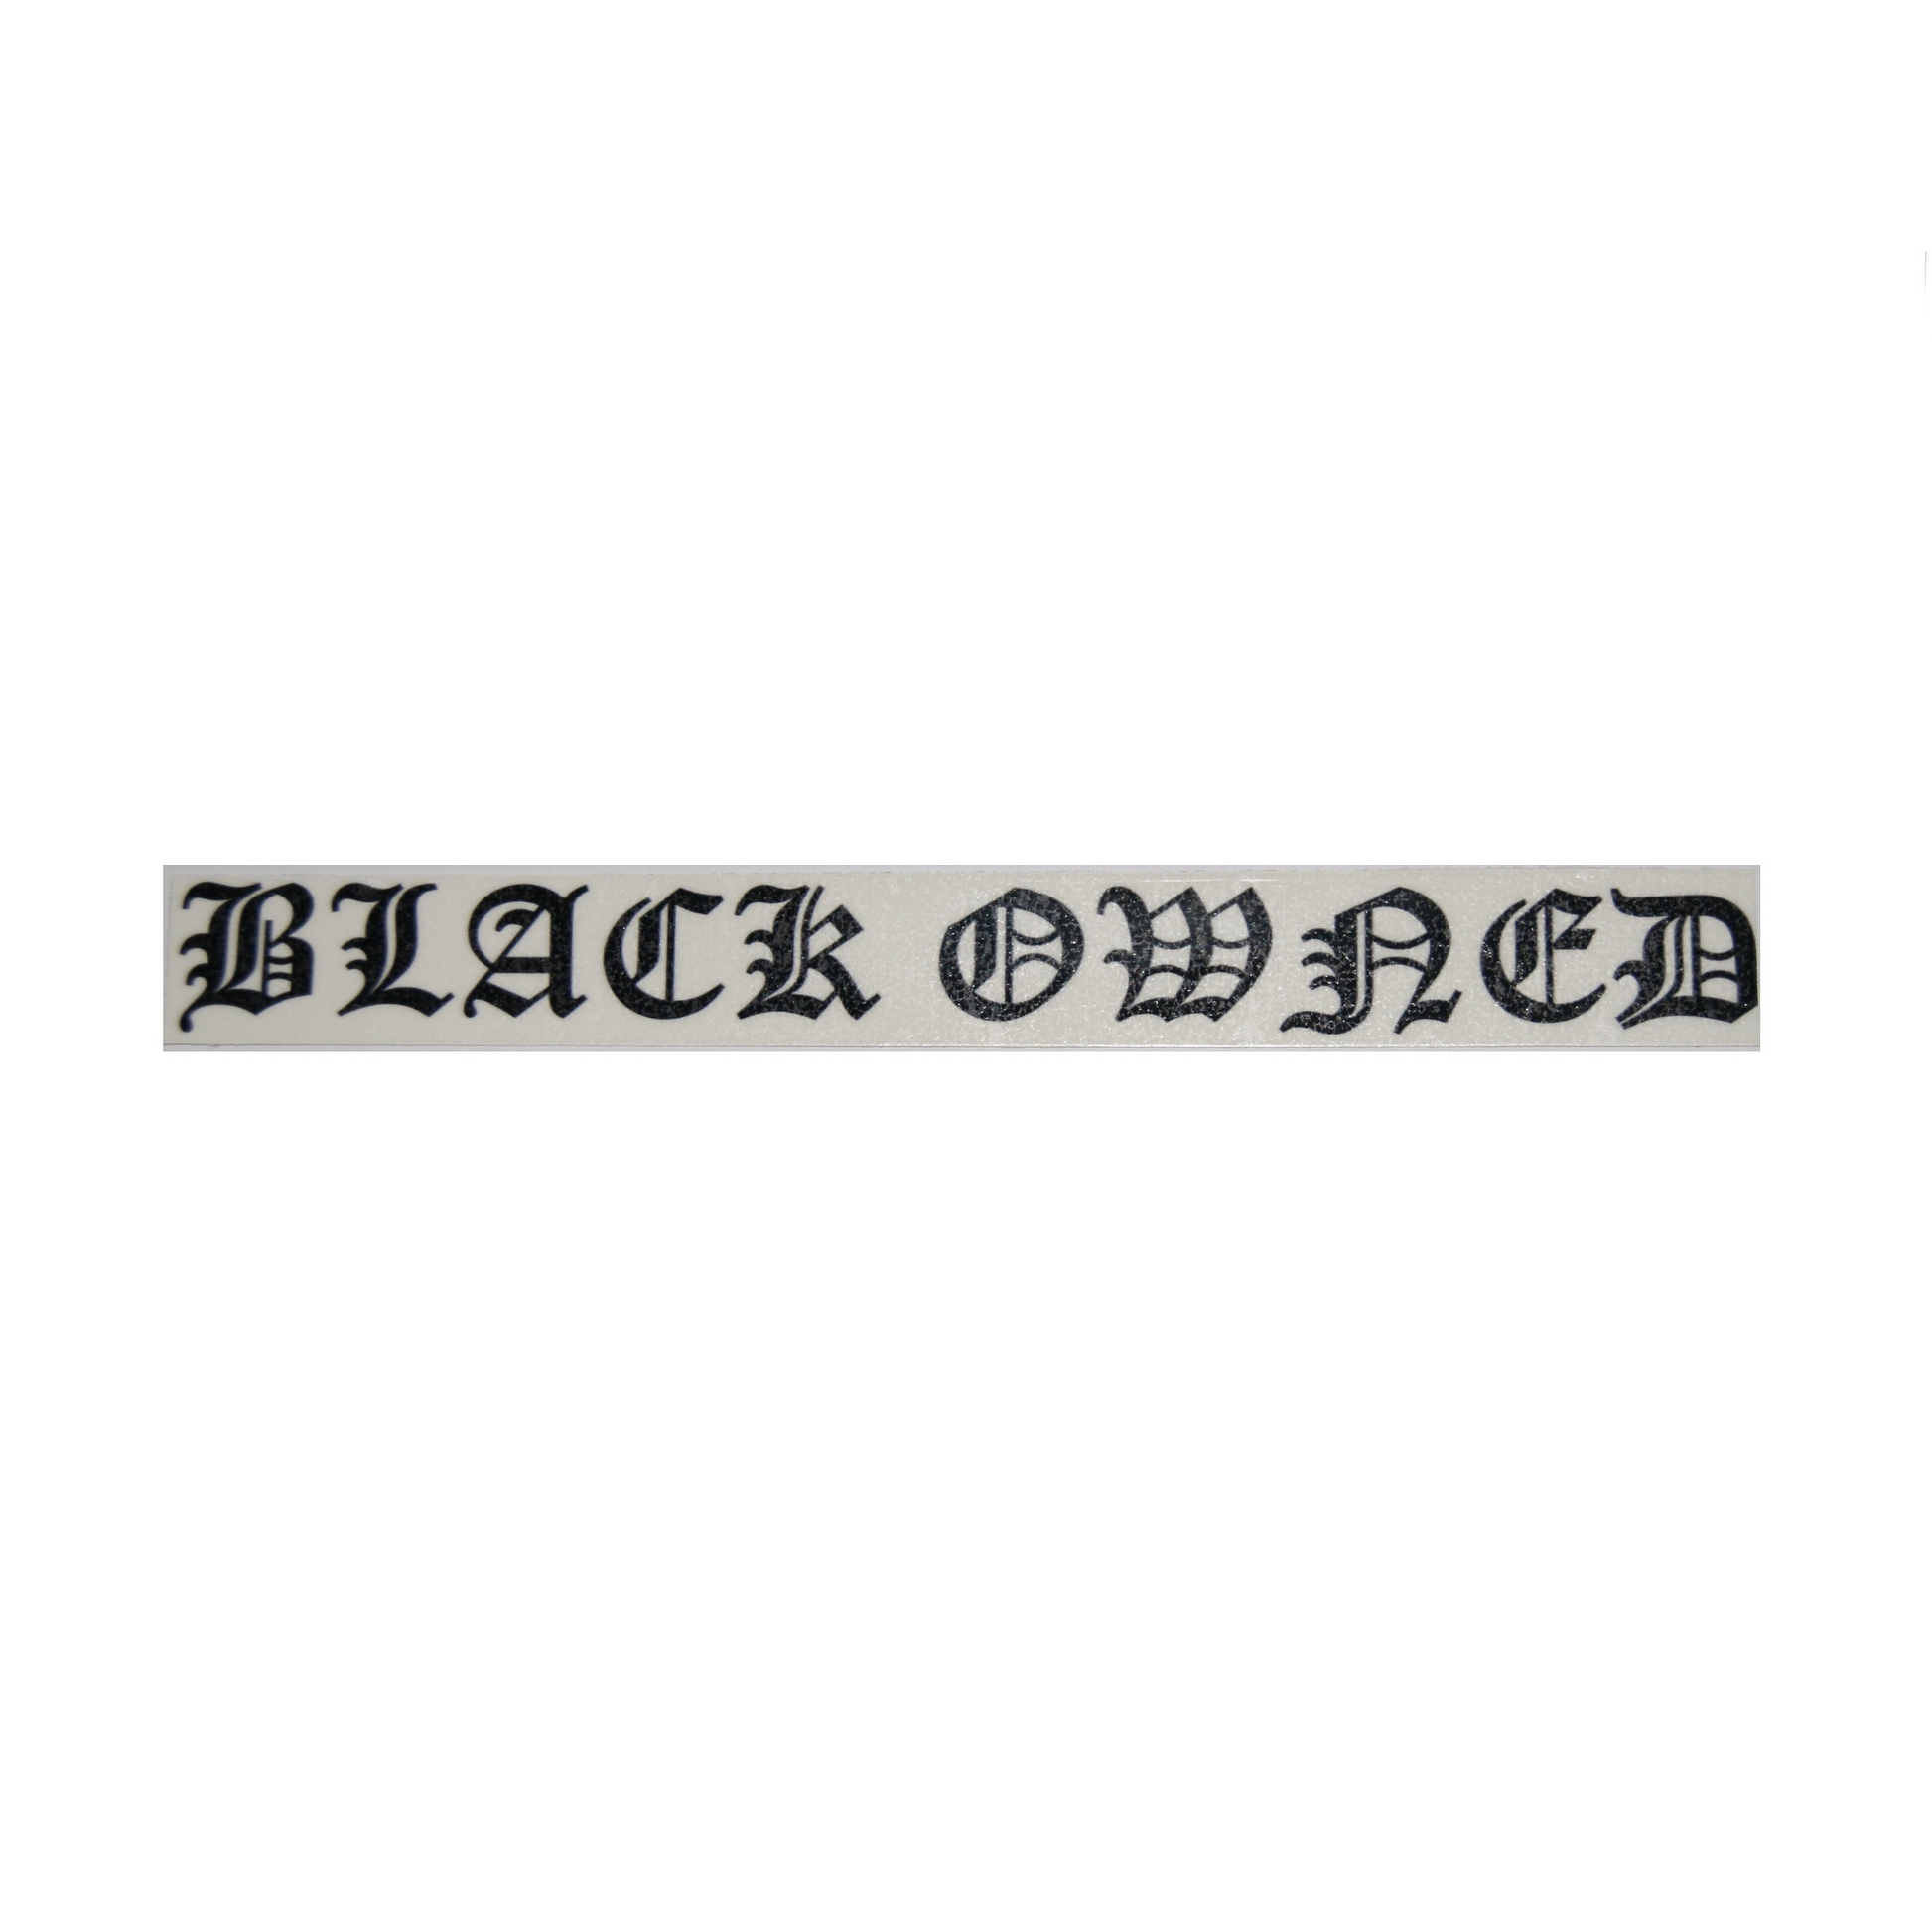 Temporary Tattoo - Black Owned Lower Back or Stomach Interracial